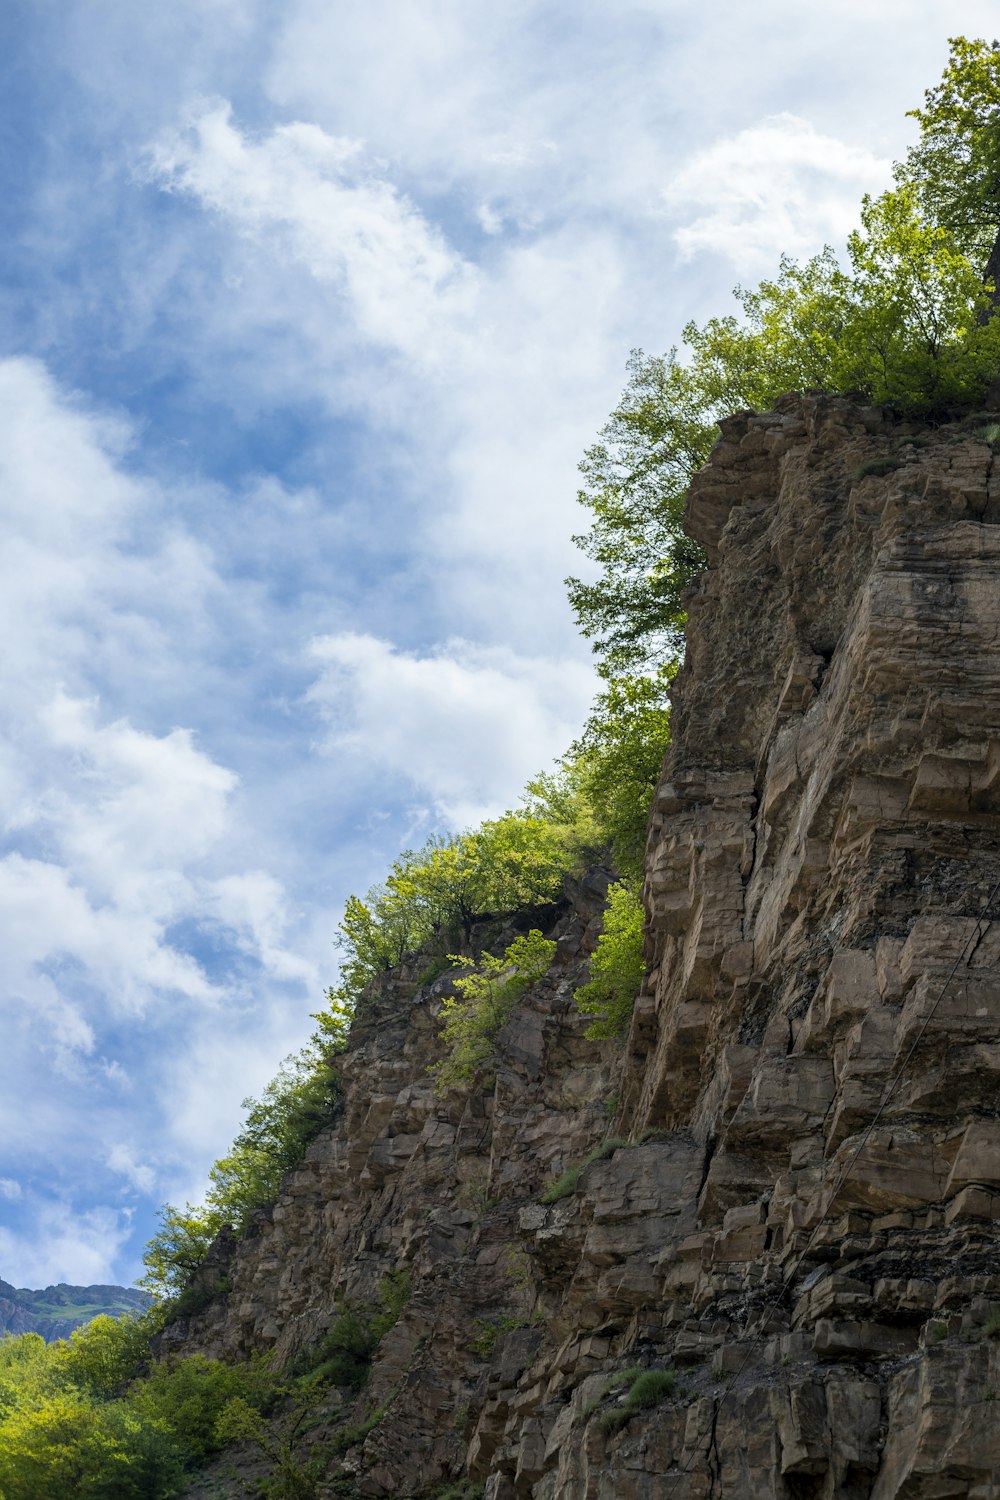 a mountain side with a steep cliff and trees growing on it